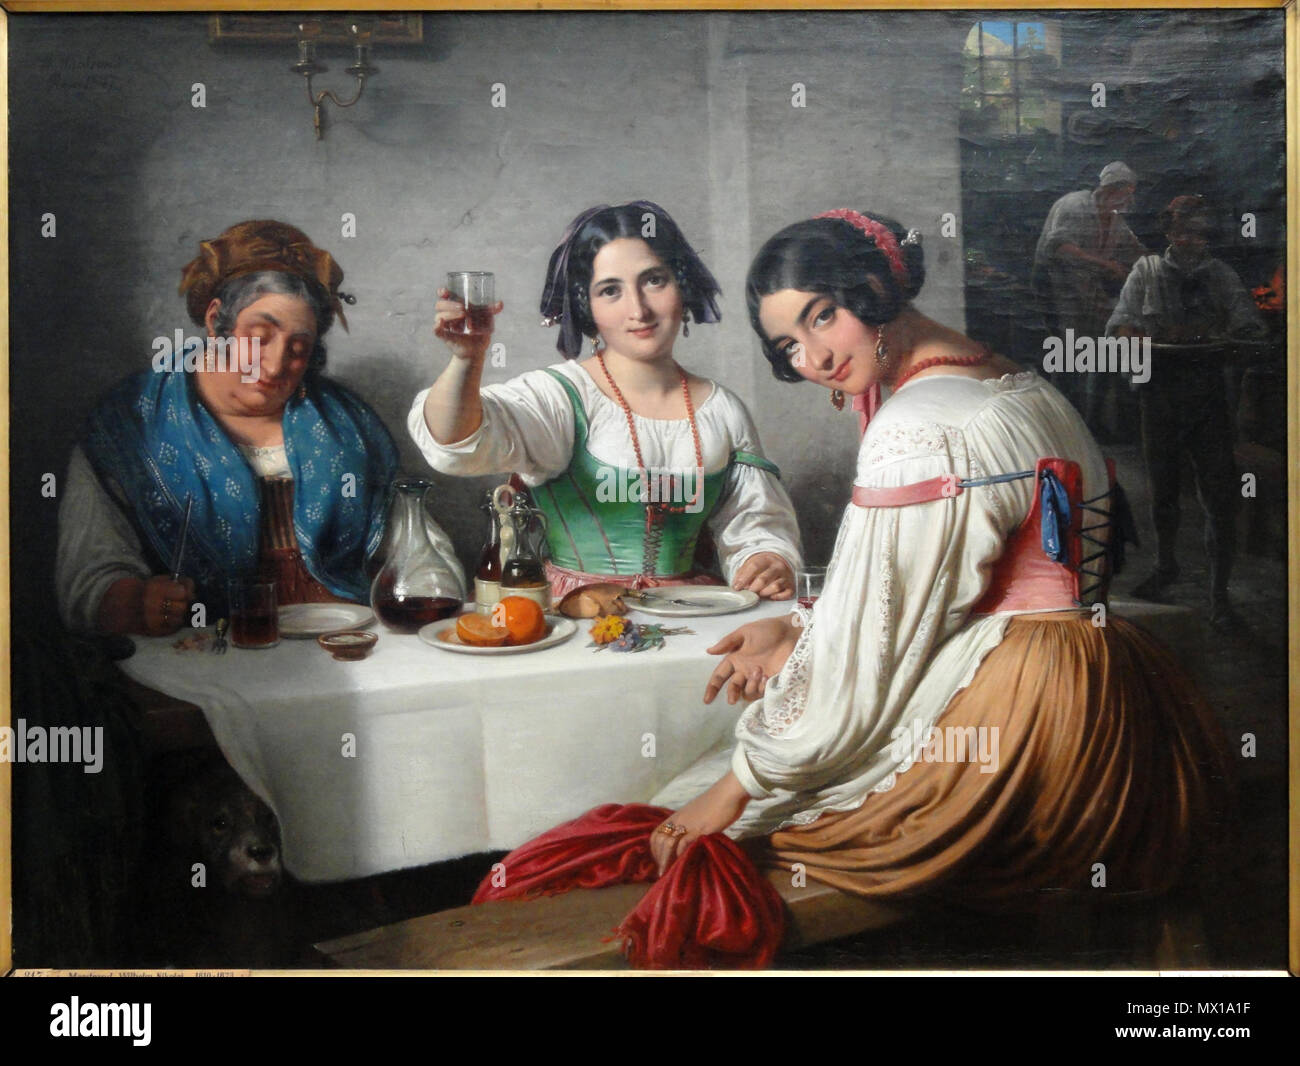 . Italian Osteria Scene, Girl welcoming a Person entering . Painting exhibited in the Ny Carlsberg Glyptotek, Dantes Plads 7, Copenhagen, Denmark. This artwork is now in the public domain because the artist died more than 70 years ago. 1847 ; 2012-05-12 08:21:43. Daderot 302 Italian Osteria Scene, Girl welcoming a Person entering, by Wilhelm Marstrand - Ny Carlsberg Glyptotek - Copenhagen - DSC09271 Stock Photo